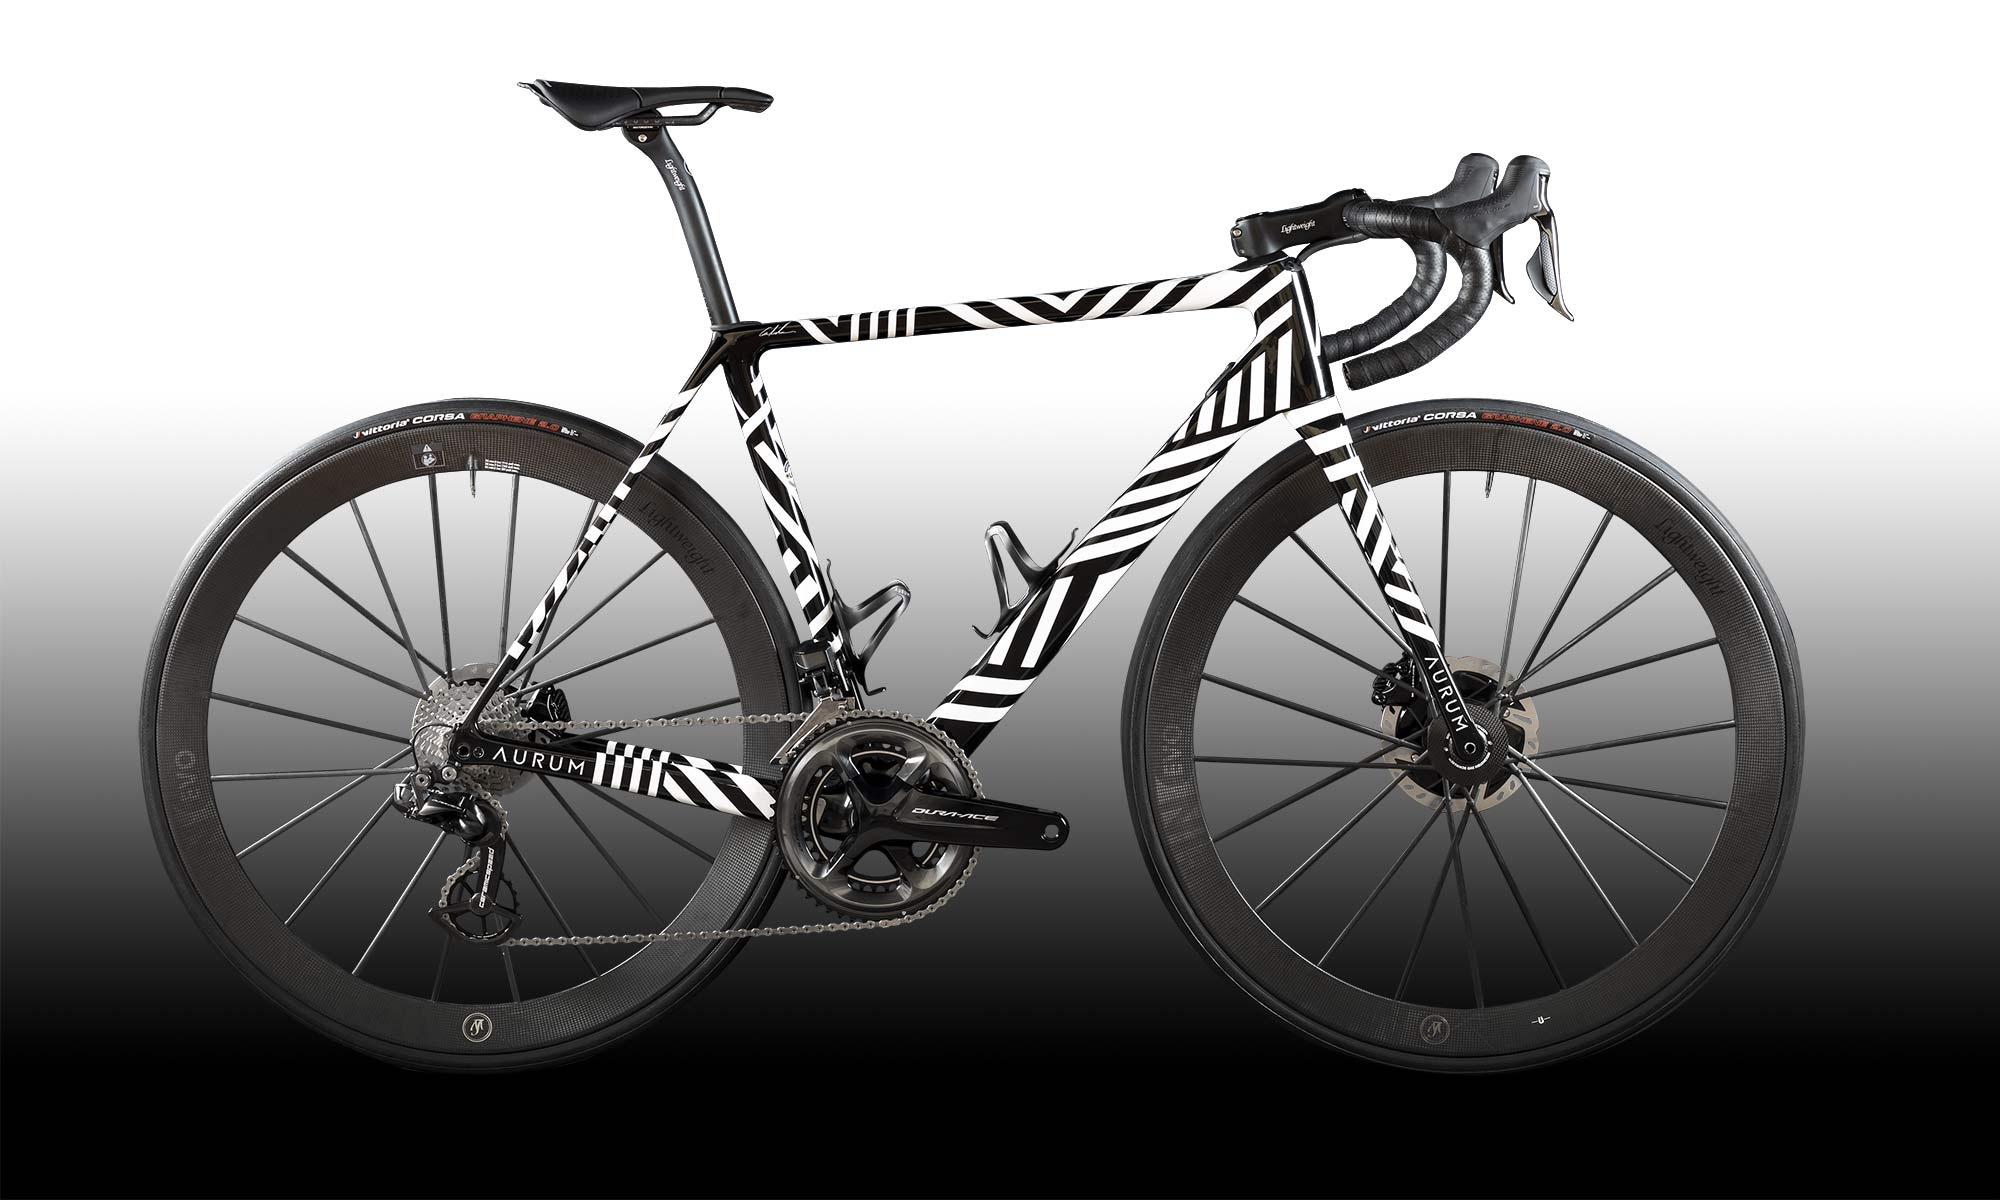 Aurum Zevra ultra-limited edition premium lightweight carbon Magma disc brake road bike by Basso & Contador, 1 of 21